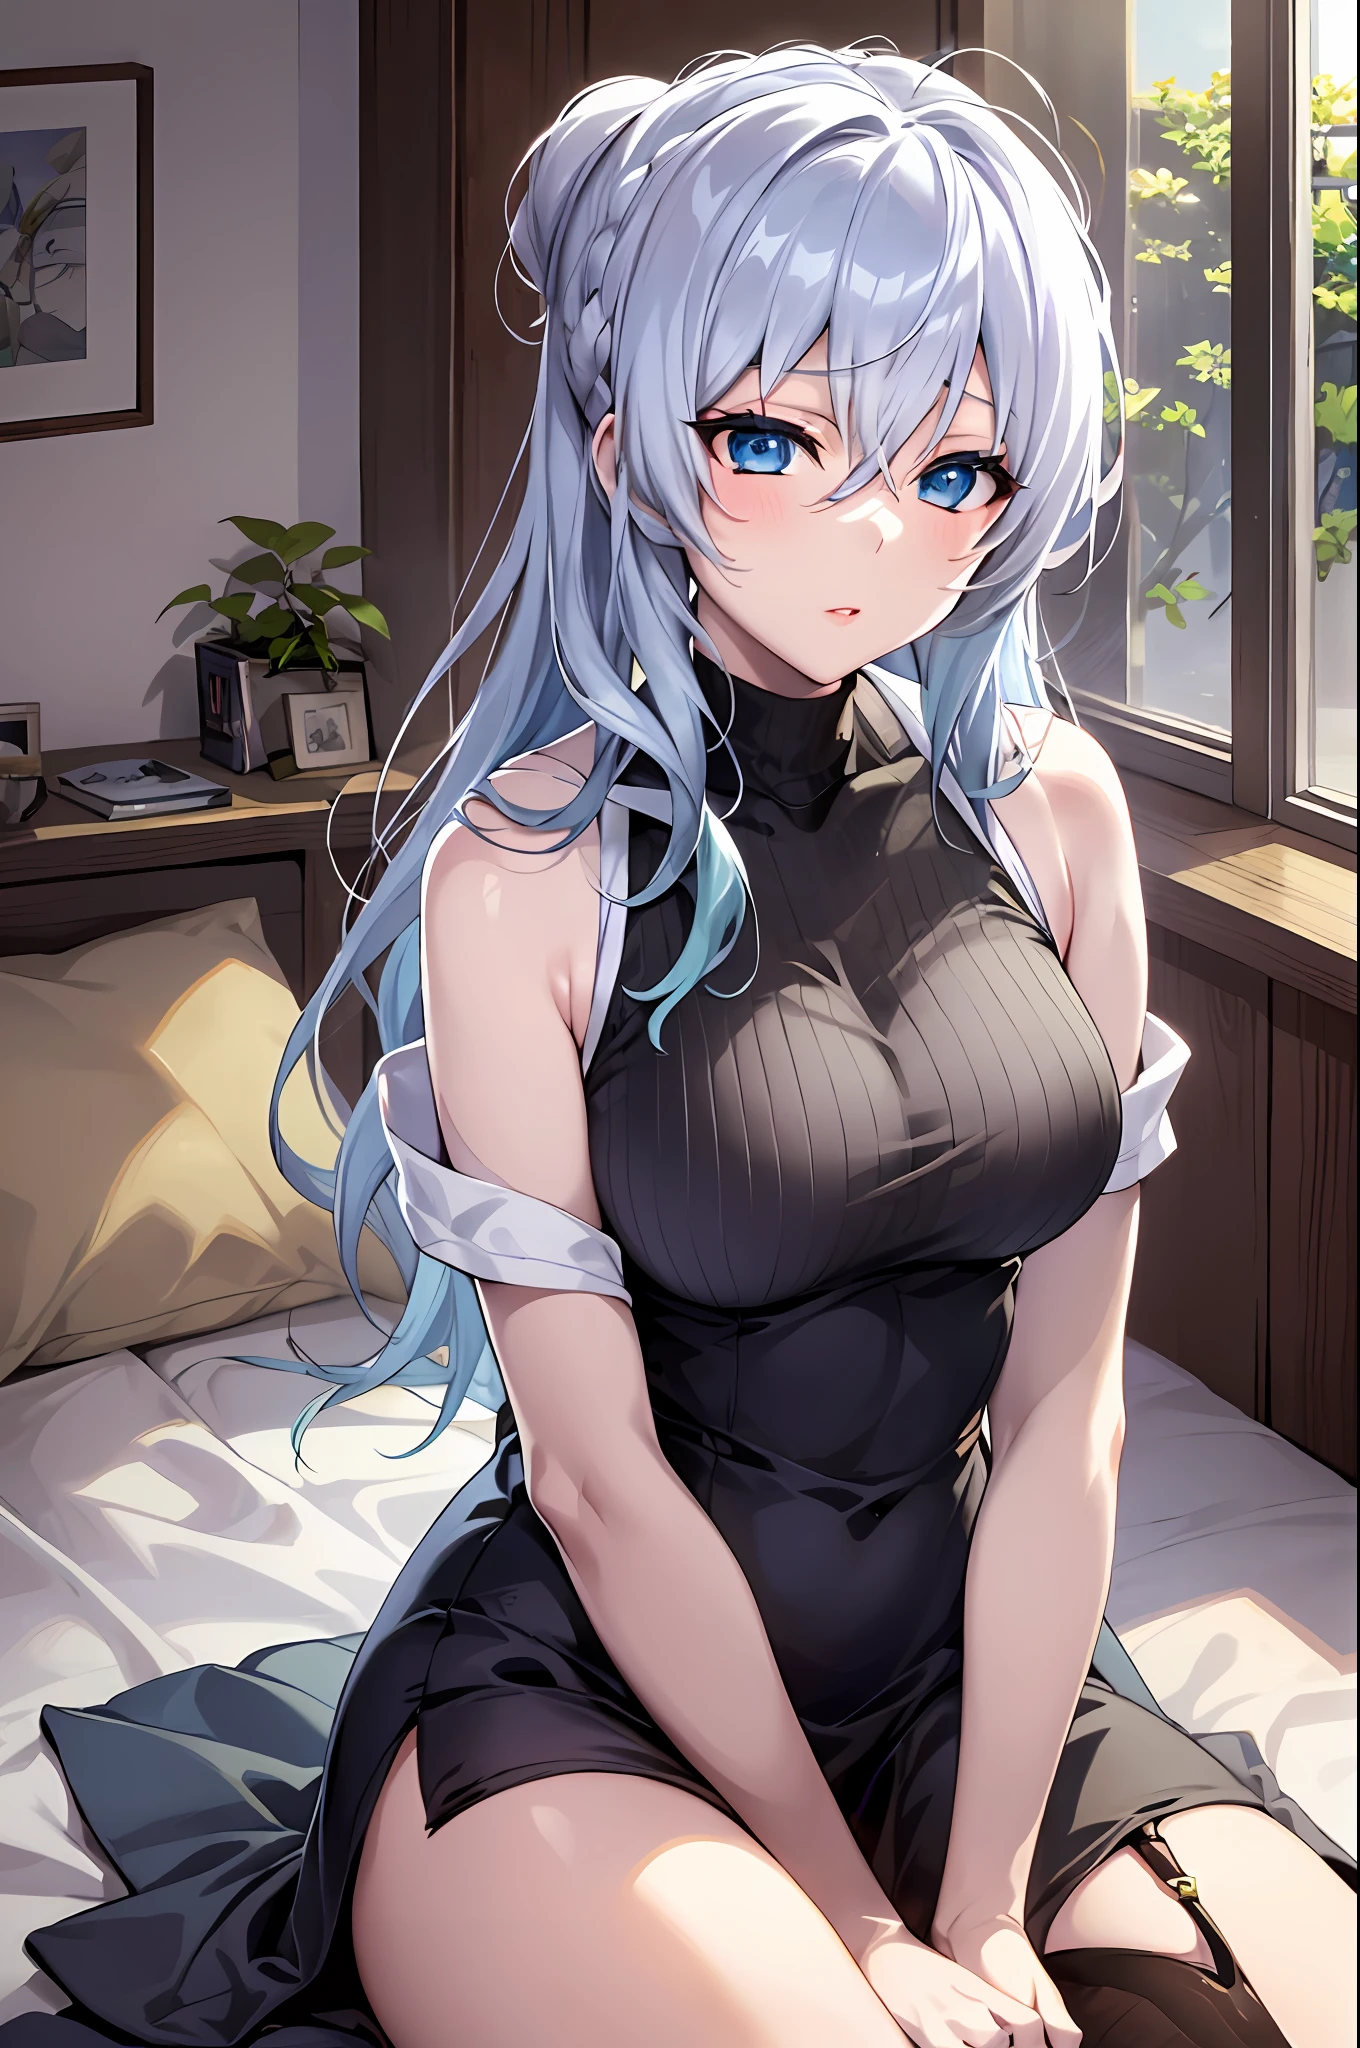 Yukino, sitting on a bed with her legs crossed, seductive anime girl, silver hair and blue eyes, attractive anime girl, cute anime girl, anime girl, sitting on her bed, (anime girl), anime best girl, sitting on a bed, sitting on the bed, an anime girl, pretty anime girl